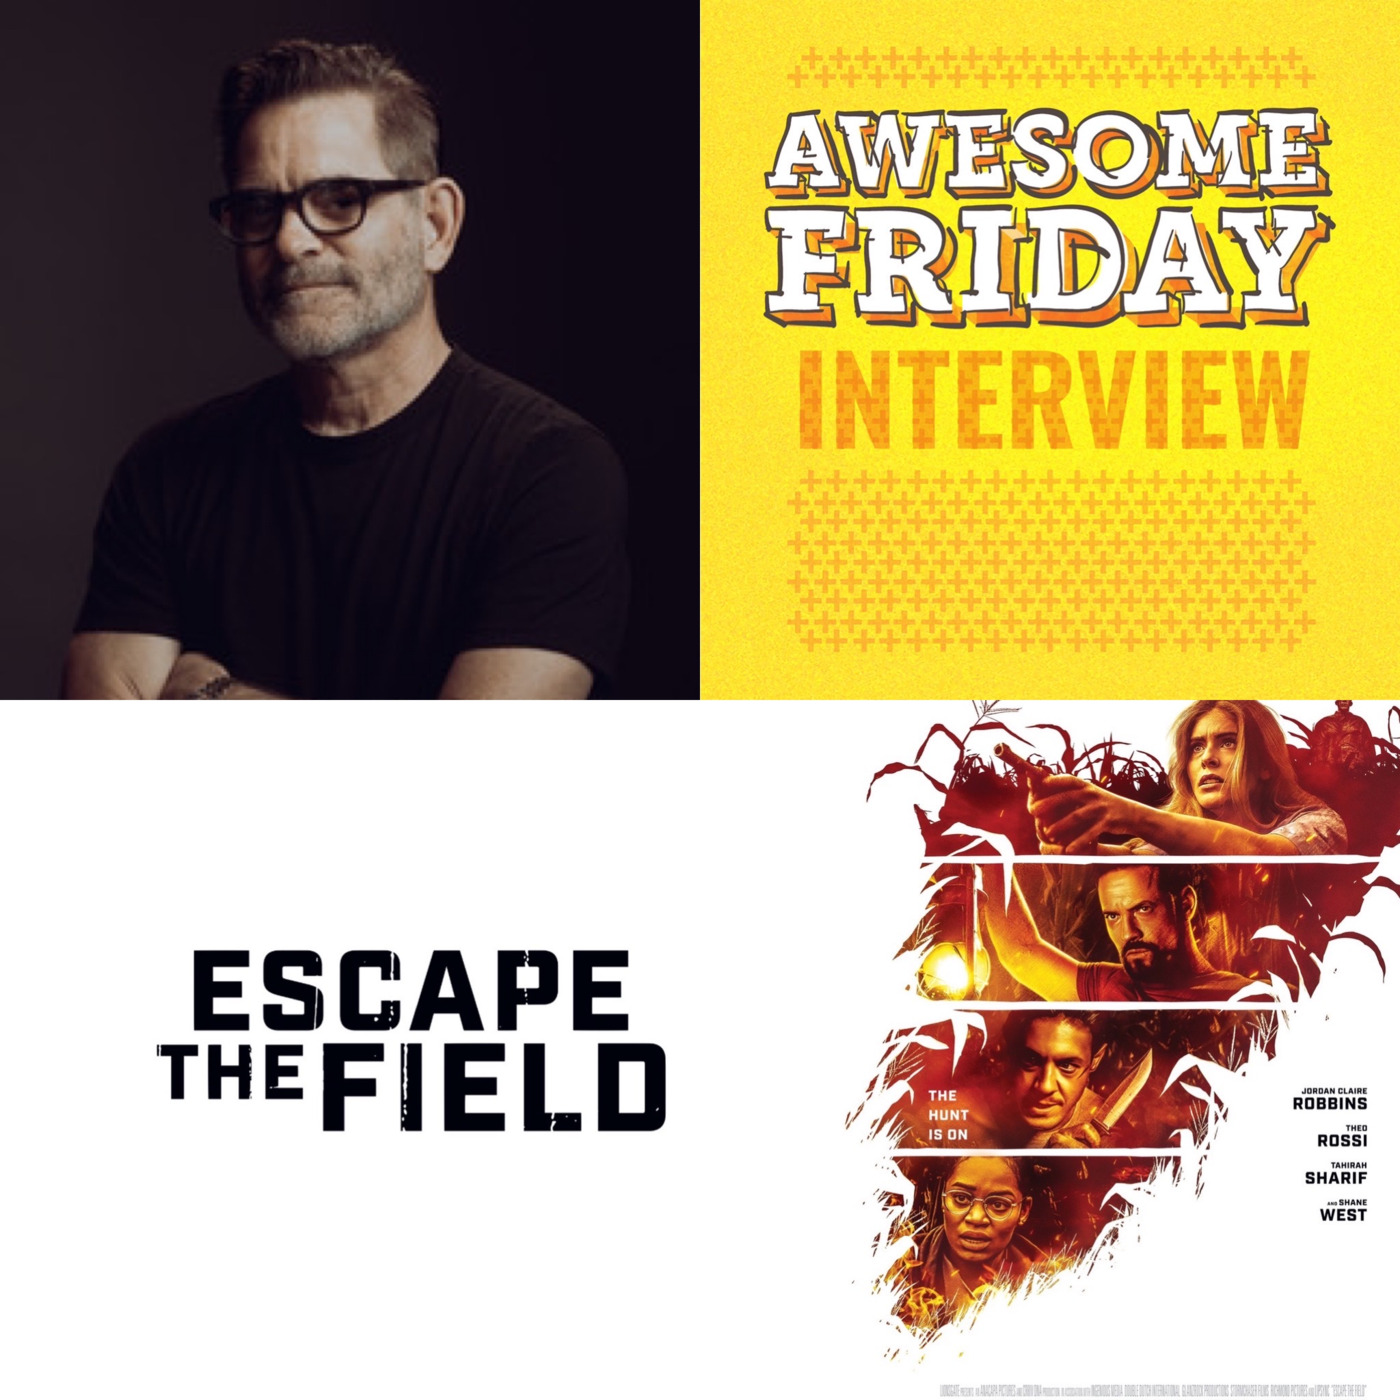 Episode 48: An Interview with Director Emerson Moore on his new film 'Escape the Field'